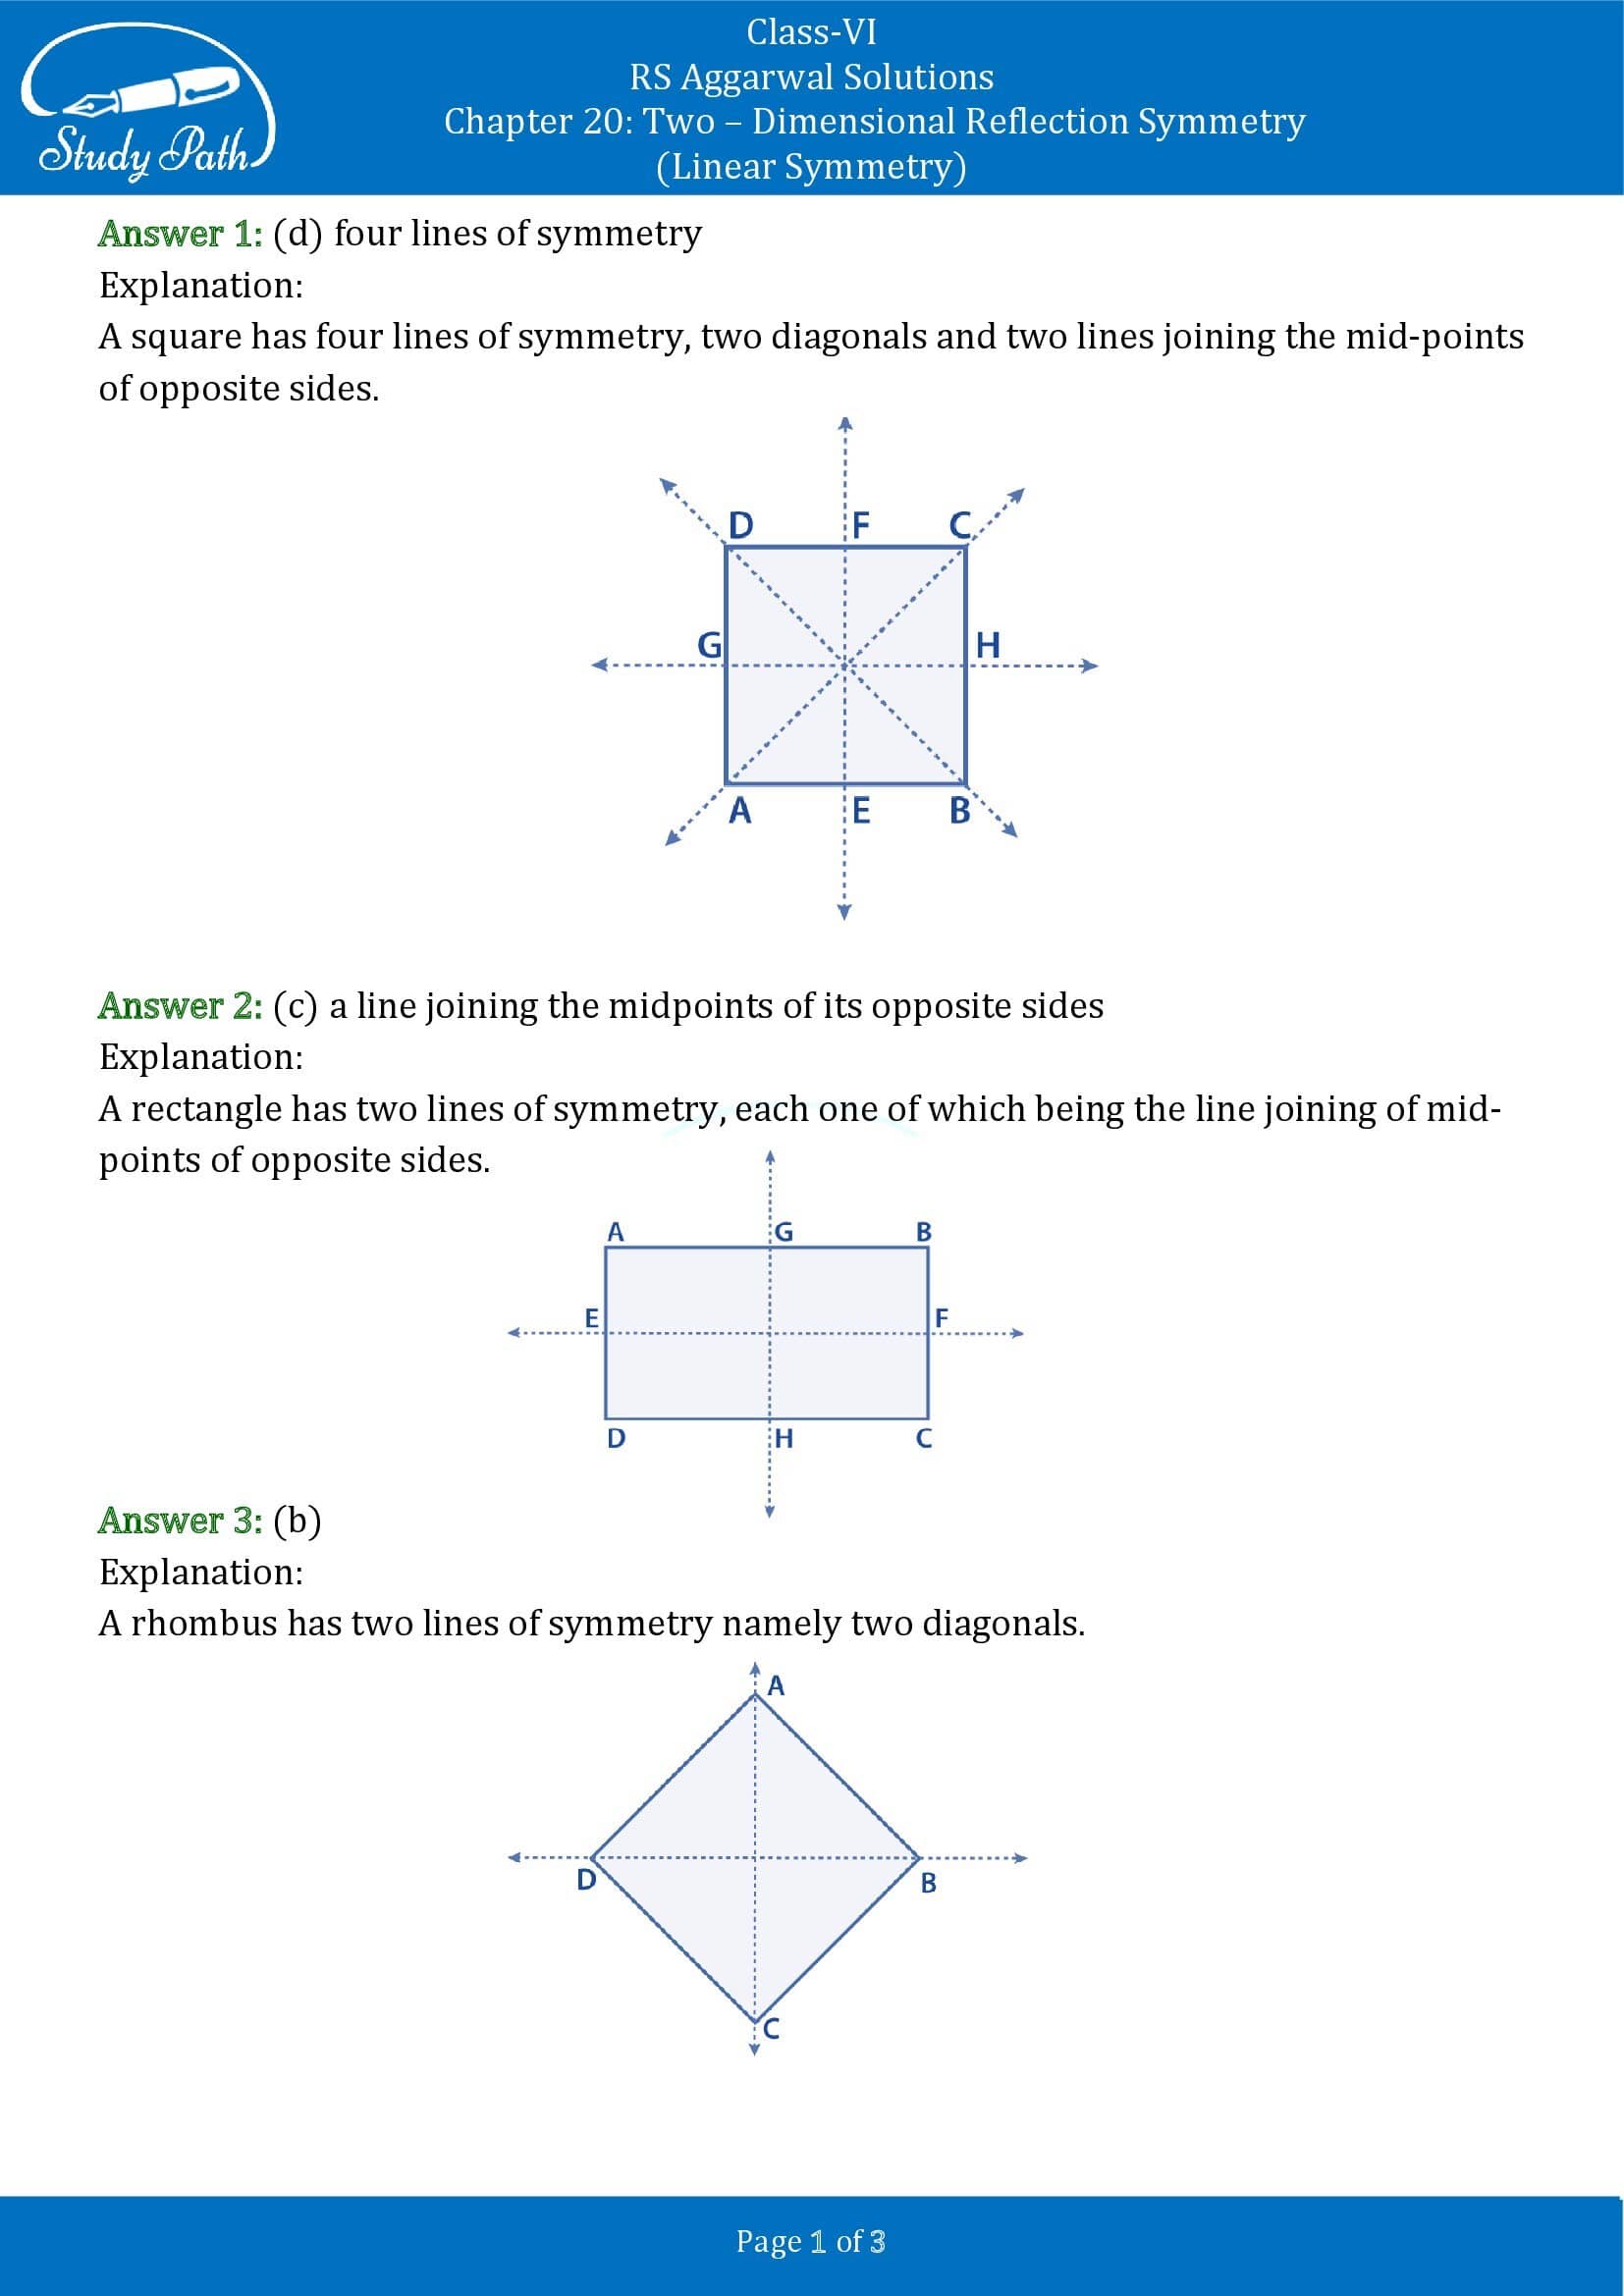 RS Aggarwal Solutions Class 6 Chapter 20 Two Dimensional Reflection Symmetry 0001